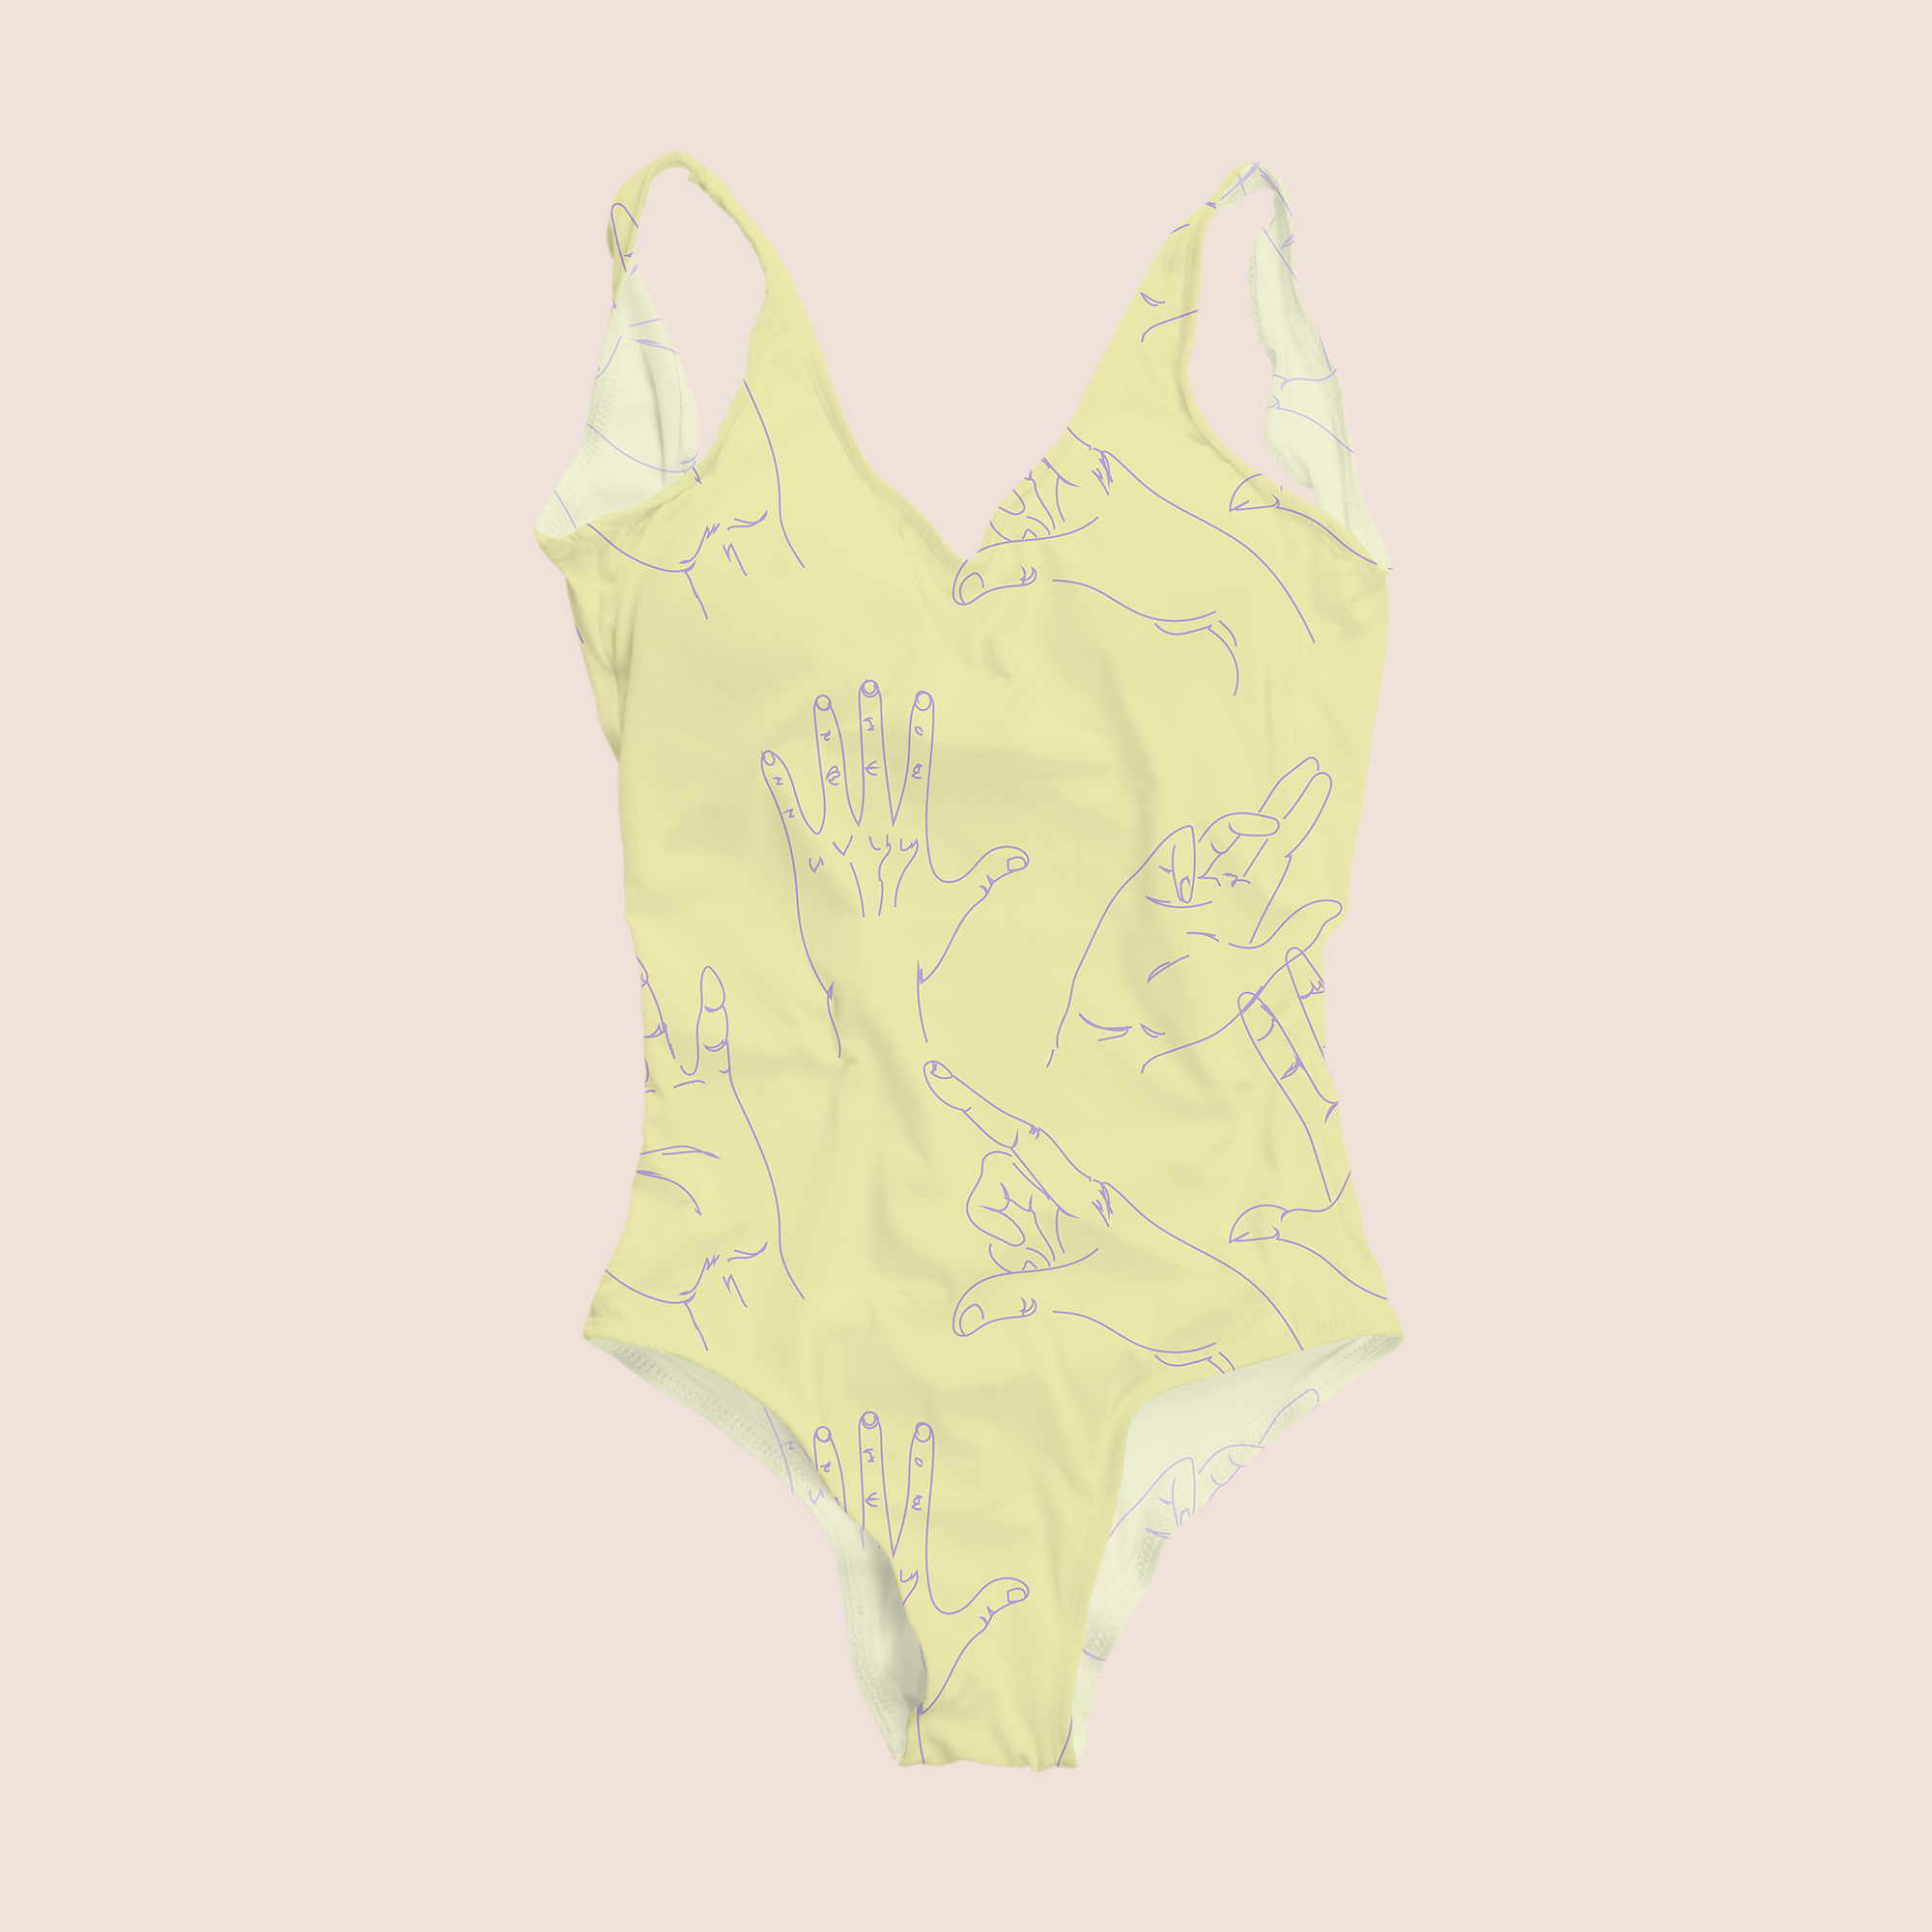 Gestures trendy in yellow pattern design printed on recycled fabric swimwear mockup